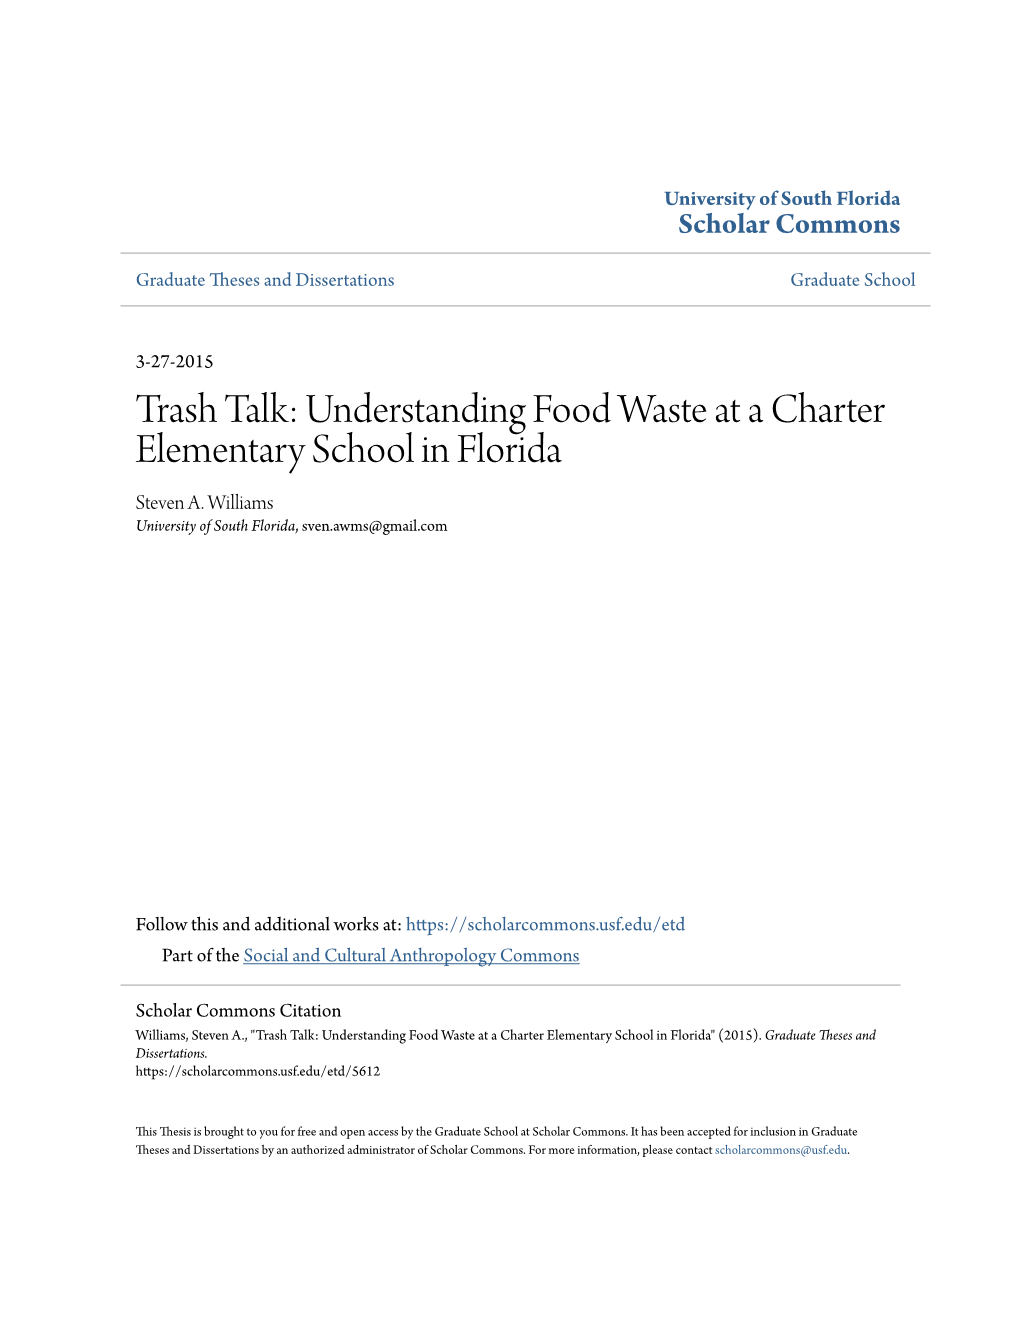 Understanding Food Waste at a Charter Elementary School in Florida Steven A